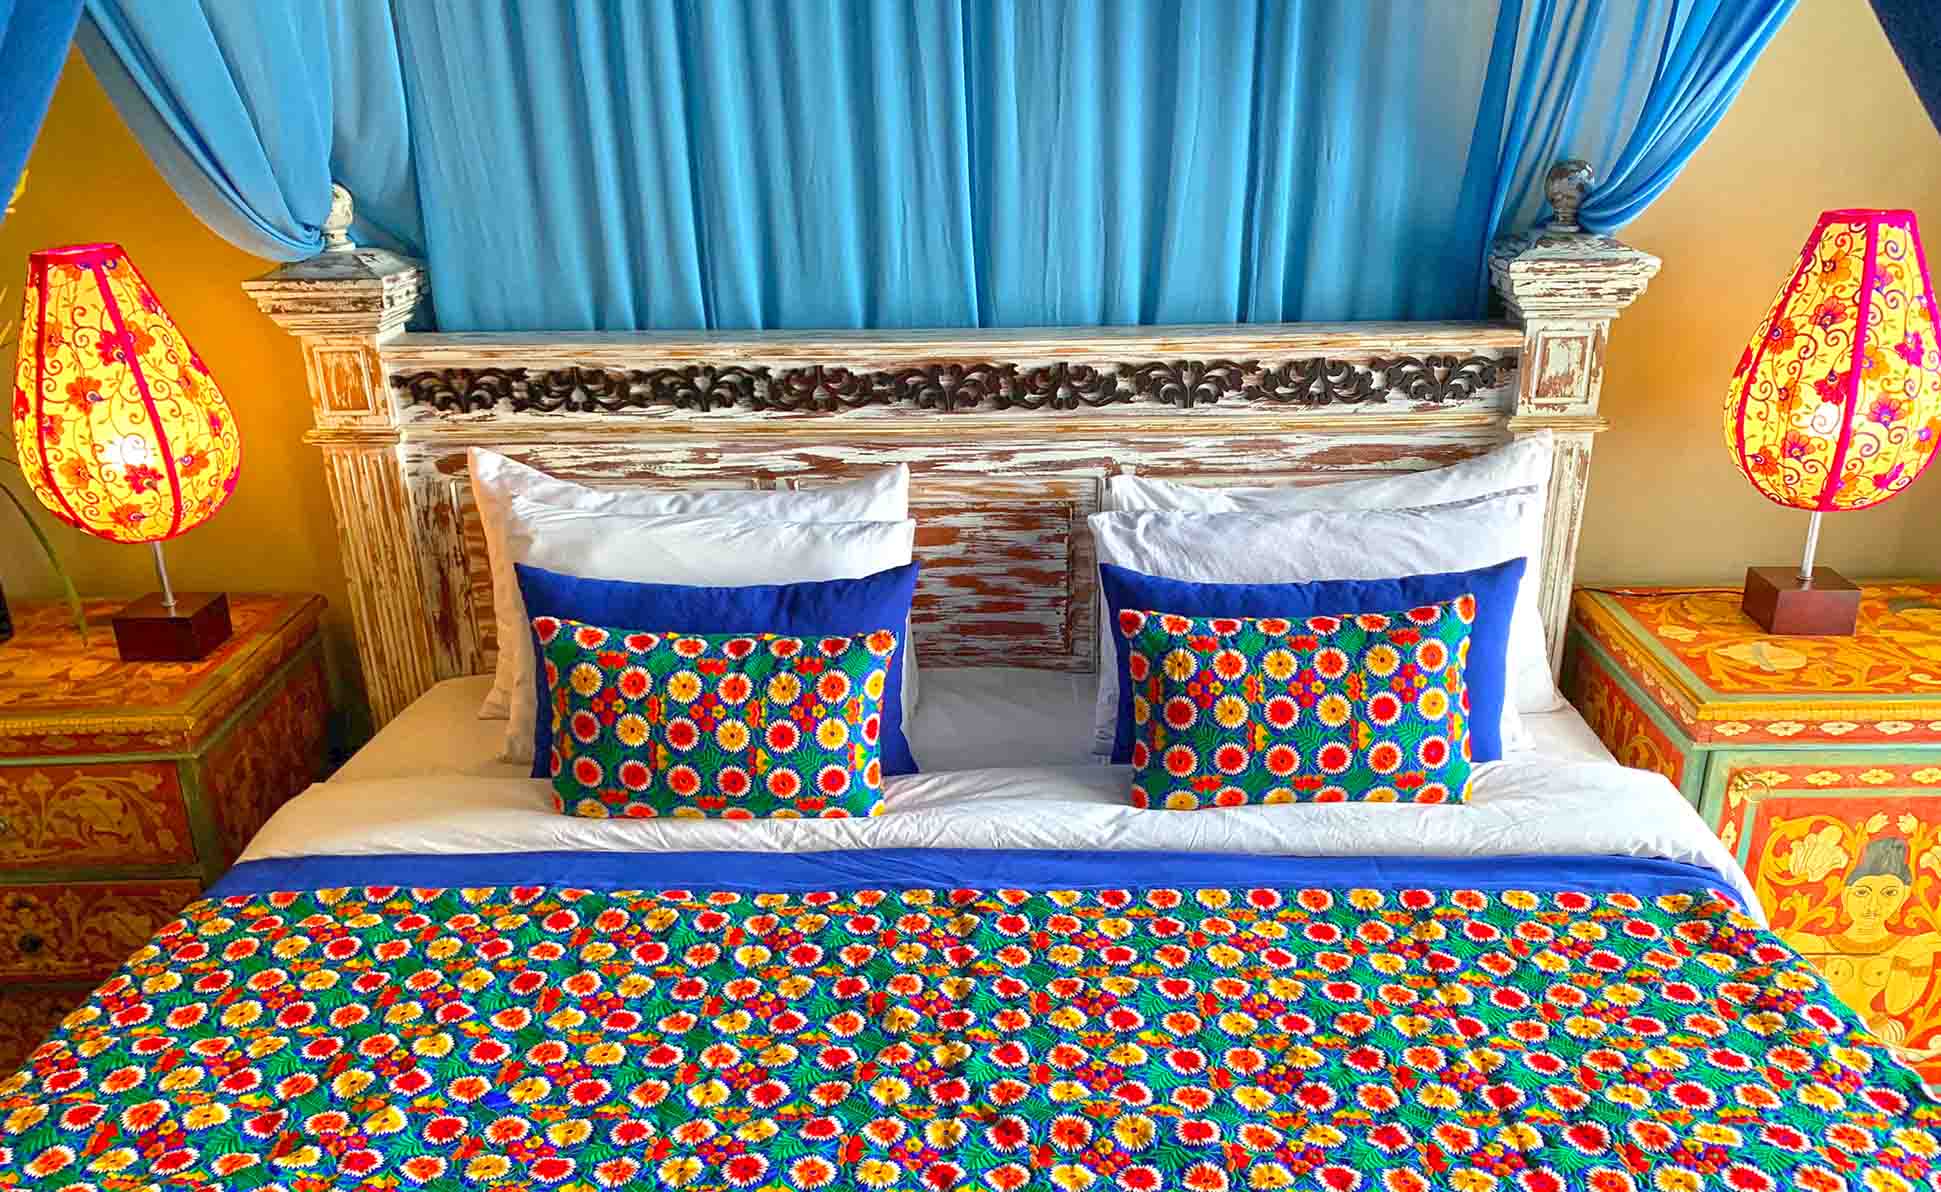 Aathma Colombo House - Rajasthan - Bed Close-up